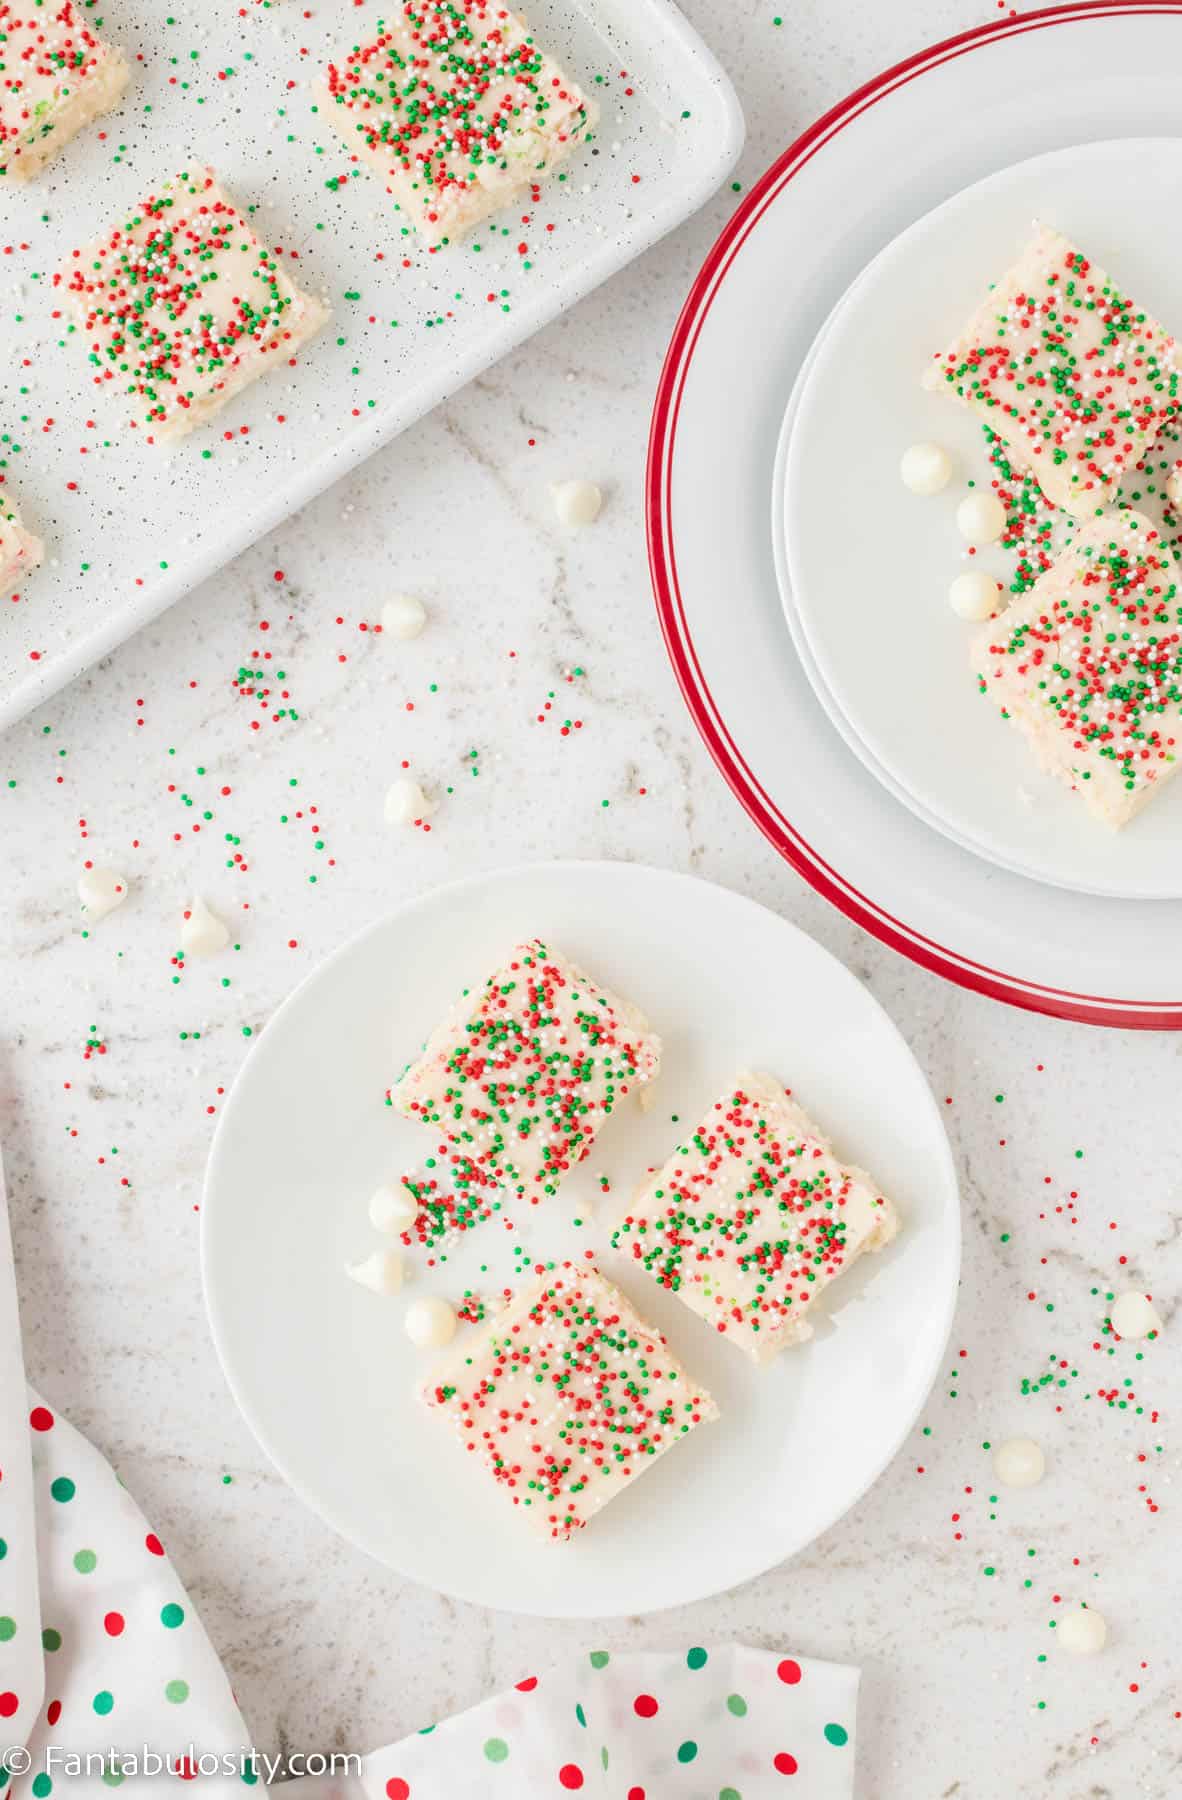 A birdseye photo of several plates holding pieces of white chocolate fudge with red white and green sprinkles